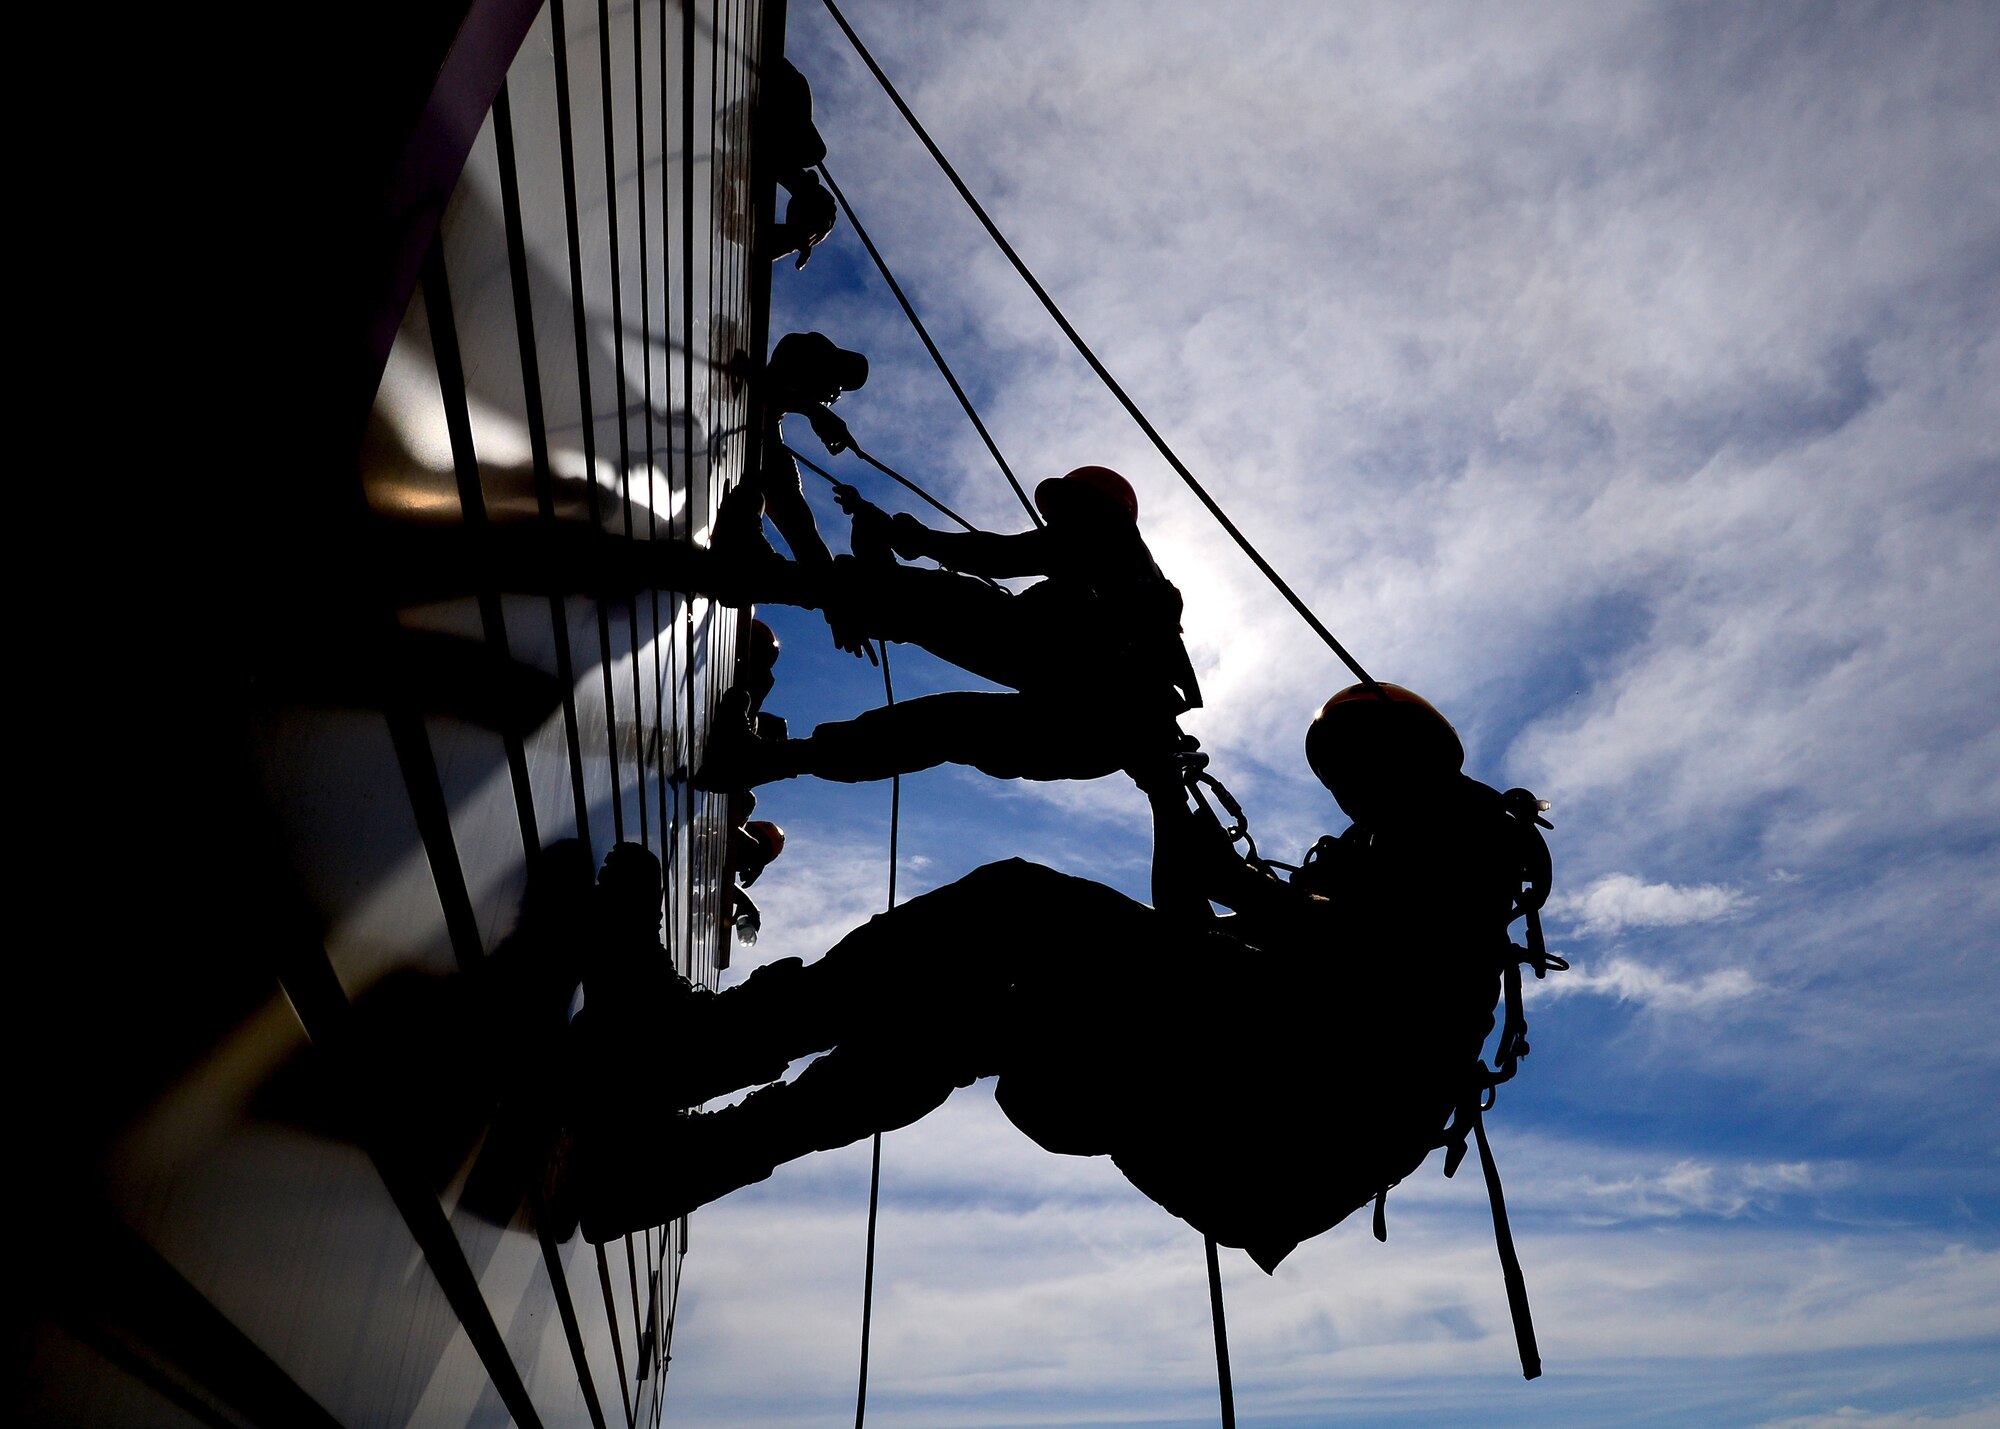 Firefighters from the 31st Civil Engineer Squadron rappel down the side of a building during a Rescue Technician One course at Aviano Air Base, Italy, Aug. 8, 2016. Fourteen Aviano firefighters participated in the training to learn how to conduct low angle, high angle and confined space rescues. (U.S. Air Force photo/Senior Airman Areca T. Bell)